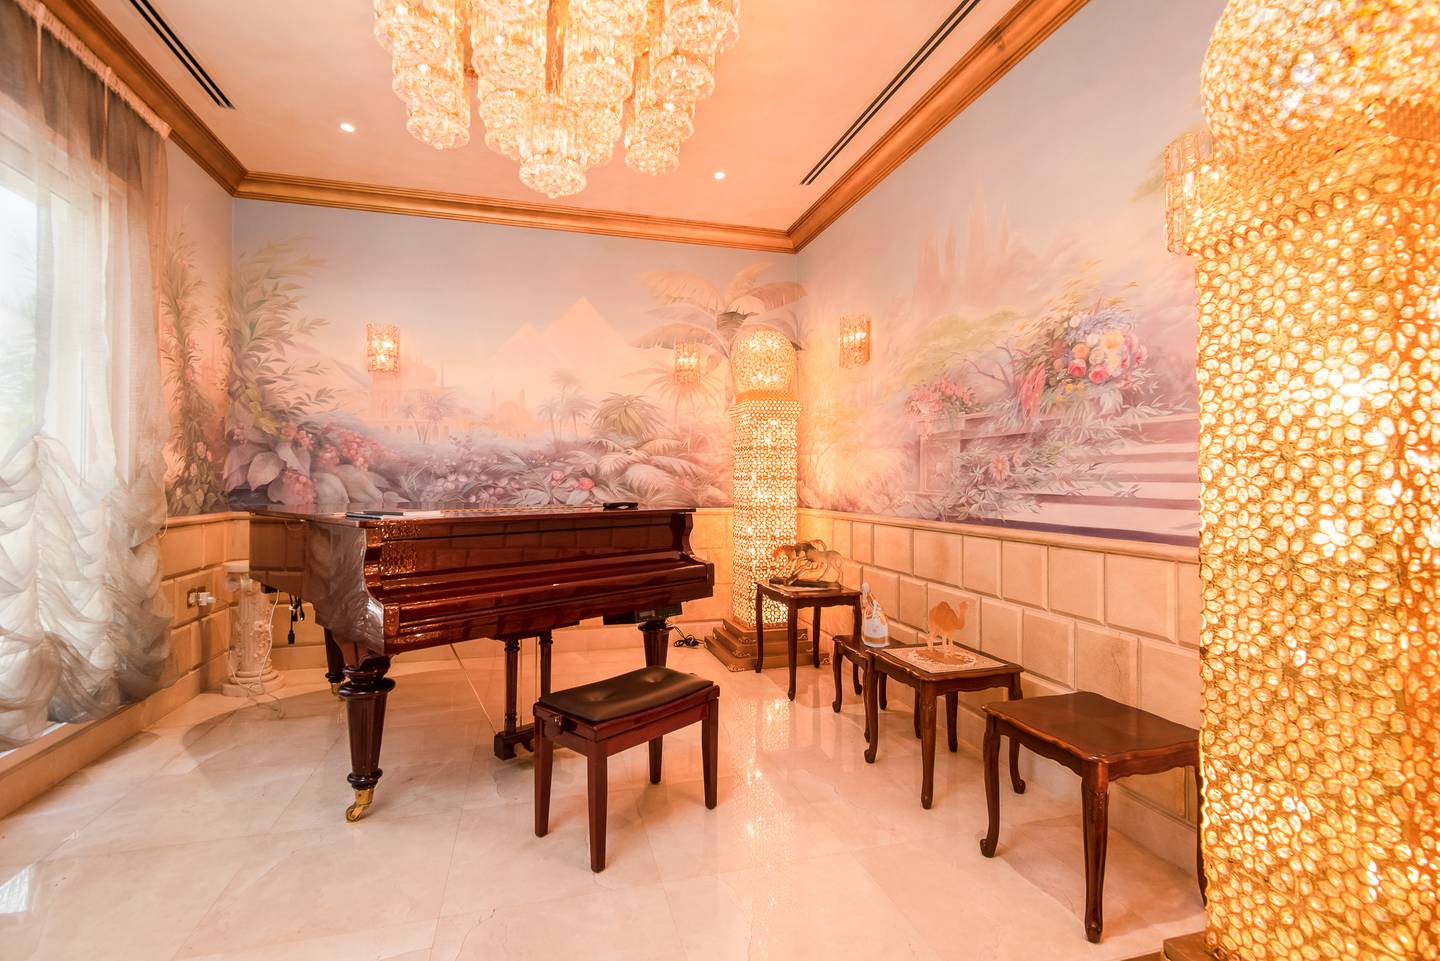 A music room with ornate wallpaper. Photo: Engel and Voelkers